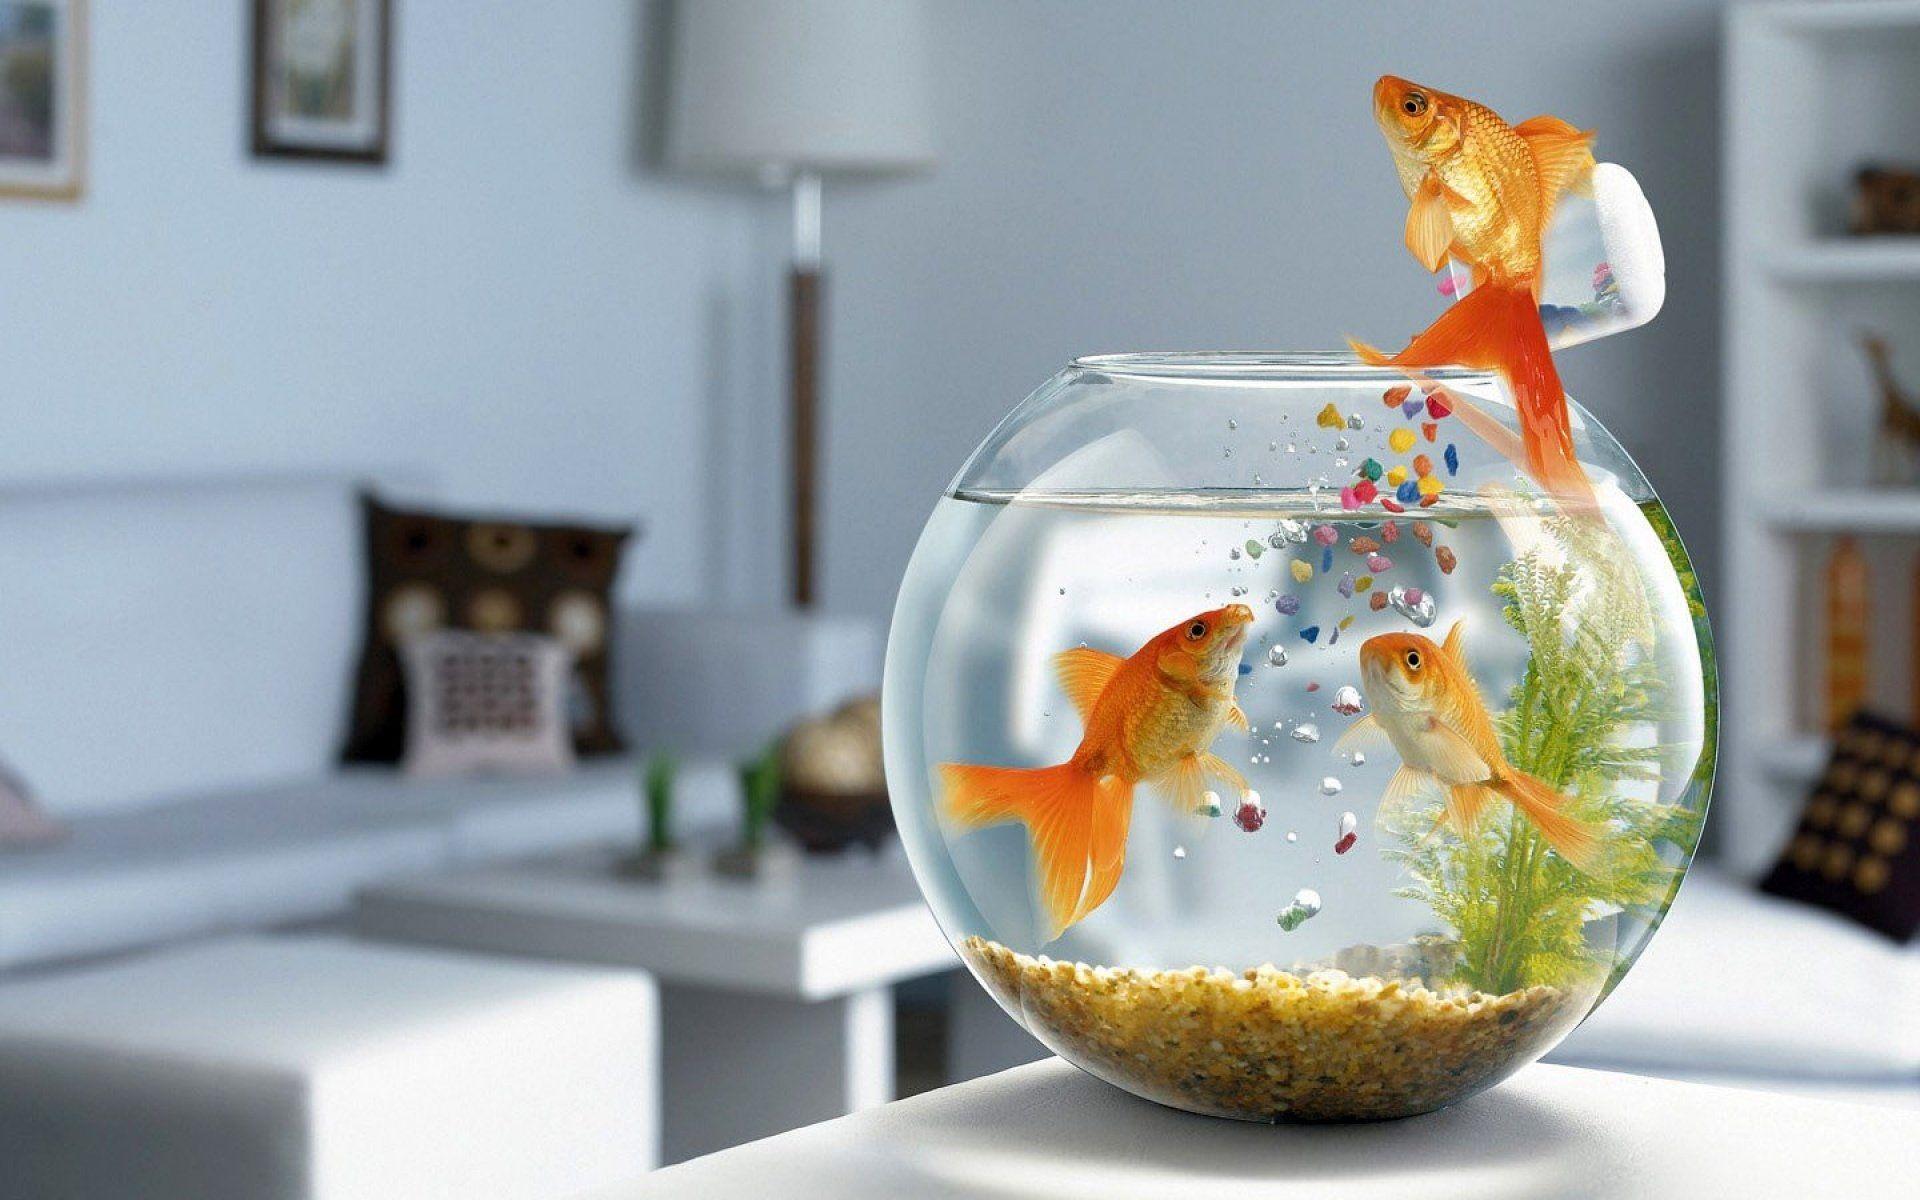 Goldfish getting their own food HD Wallpaper. Background Image